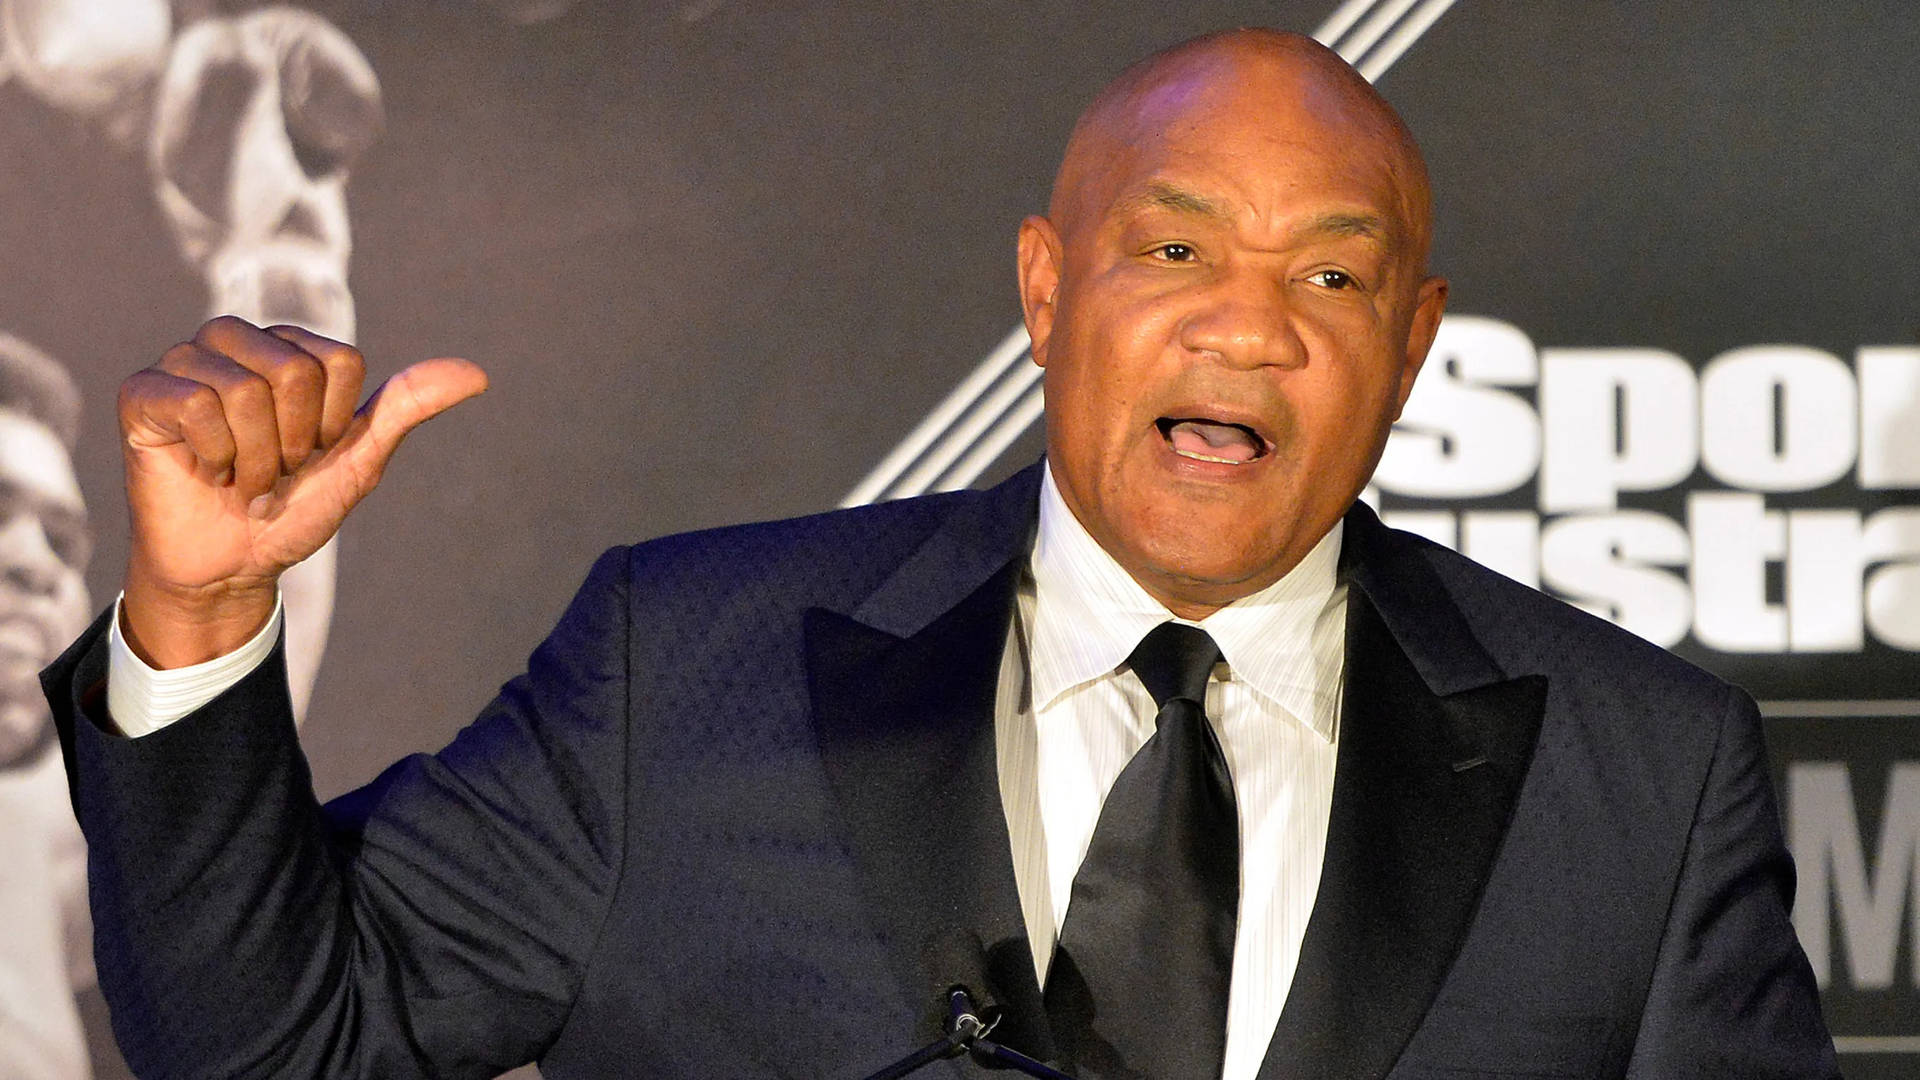 George Foreman At Sports Illustrated Event Wallpaper